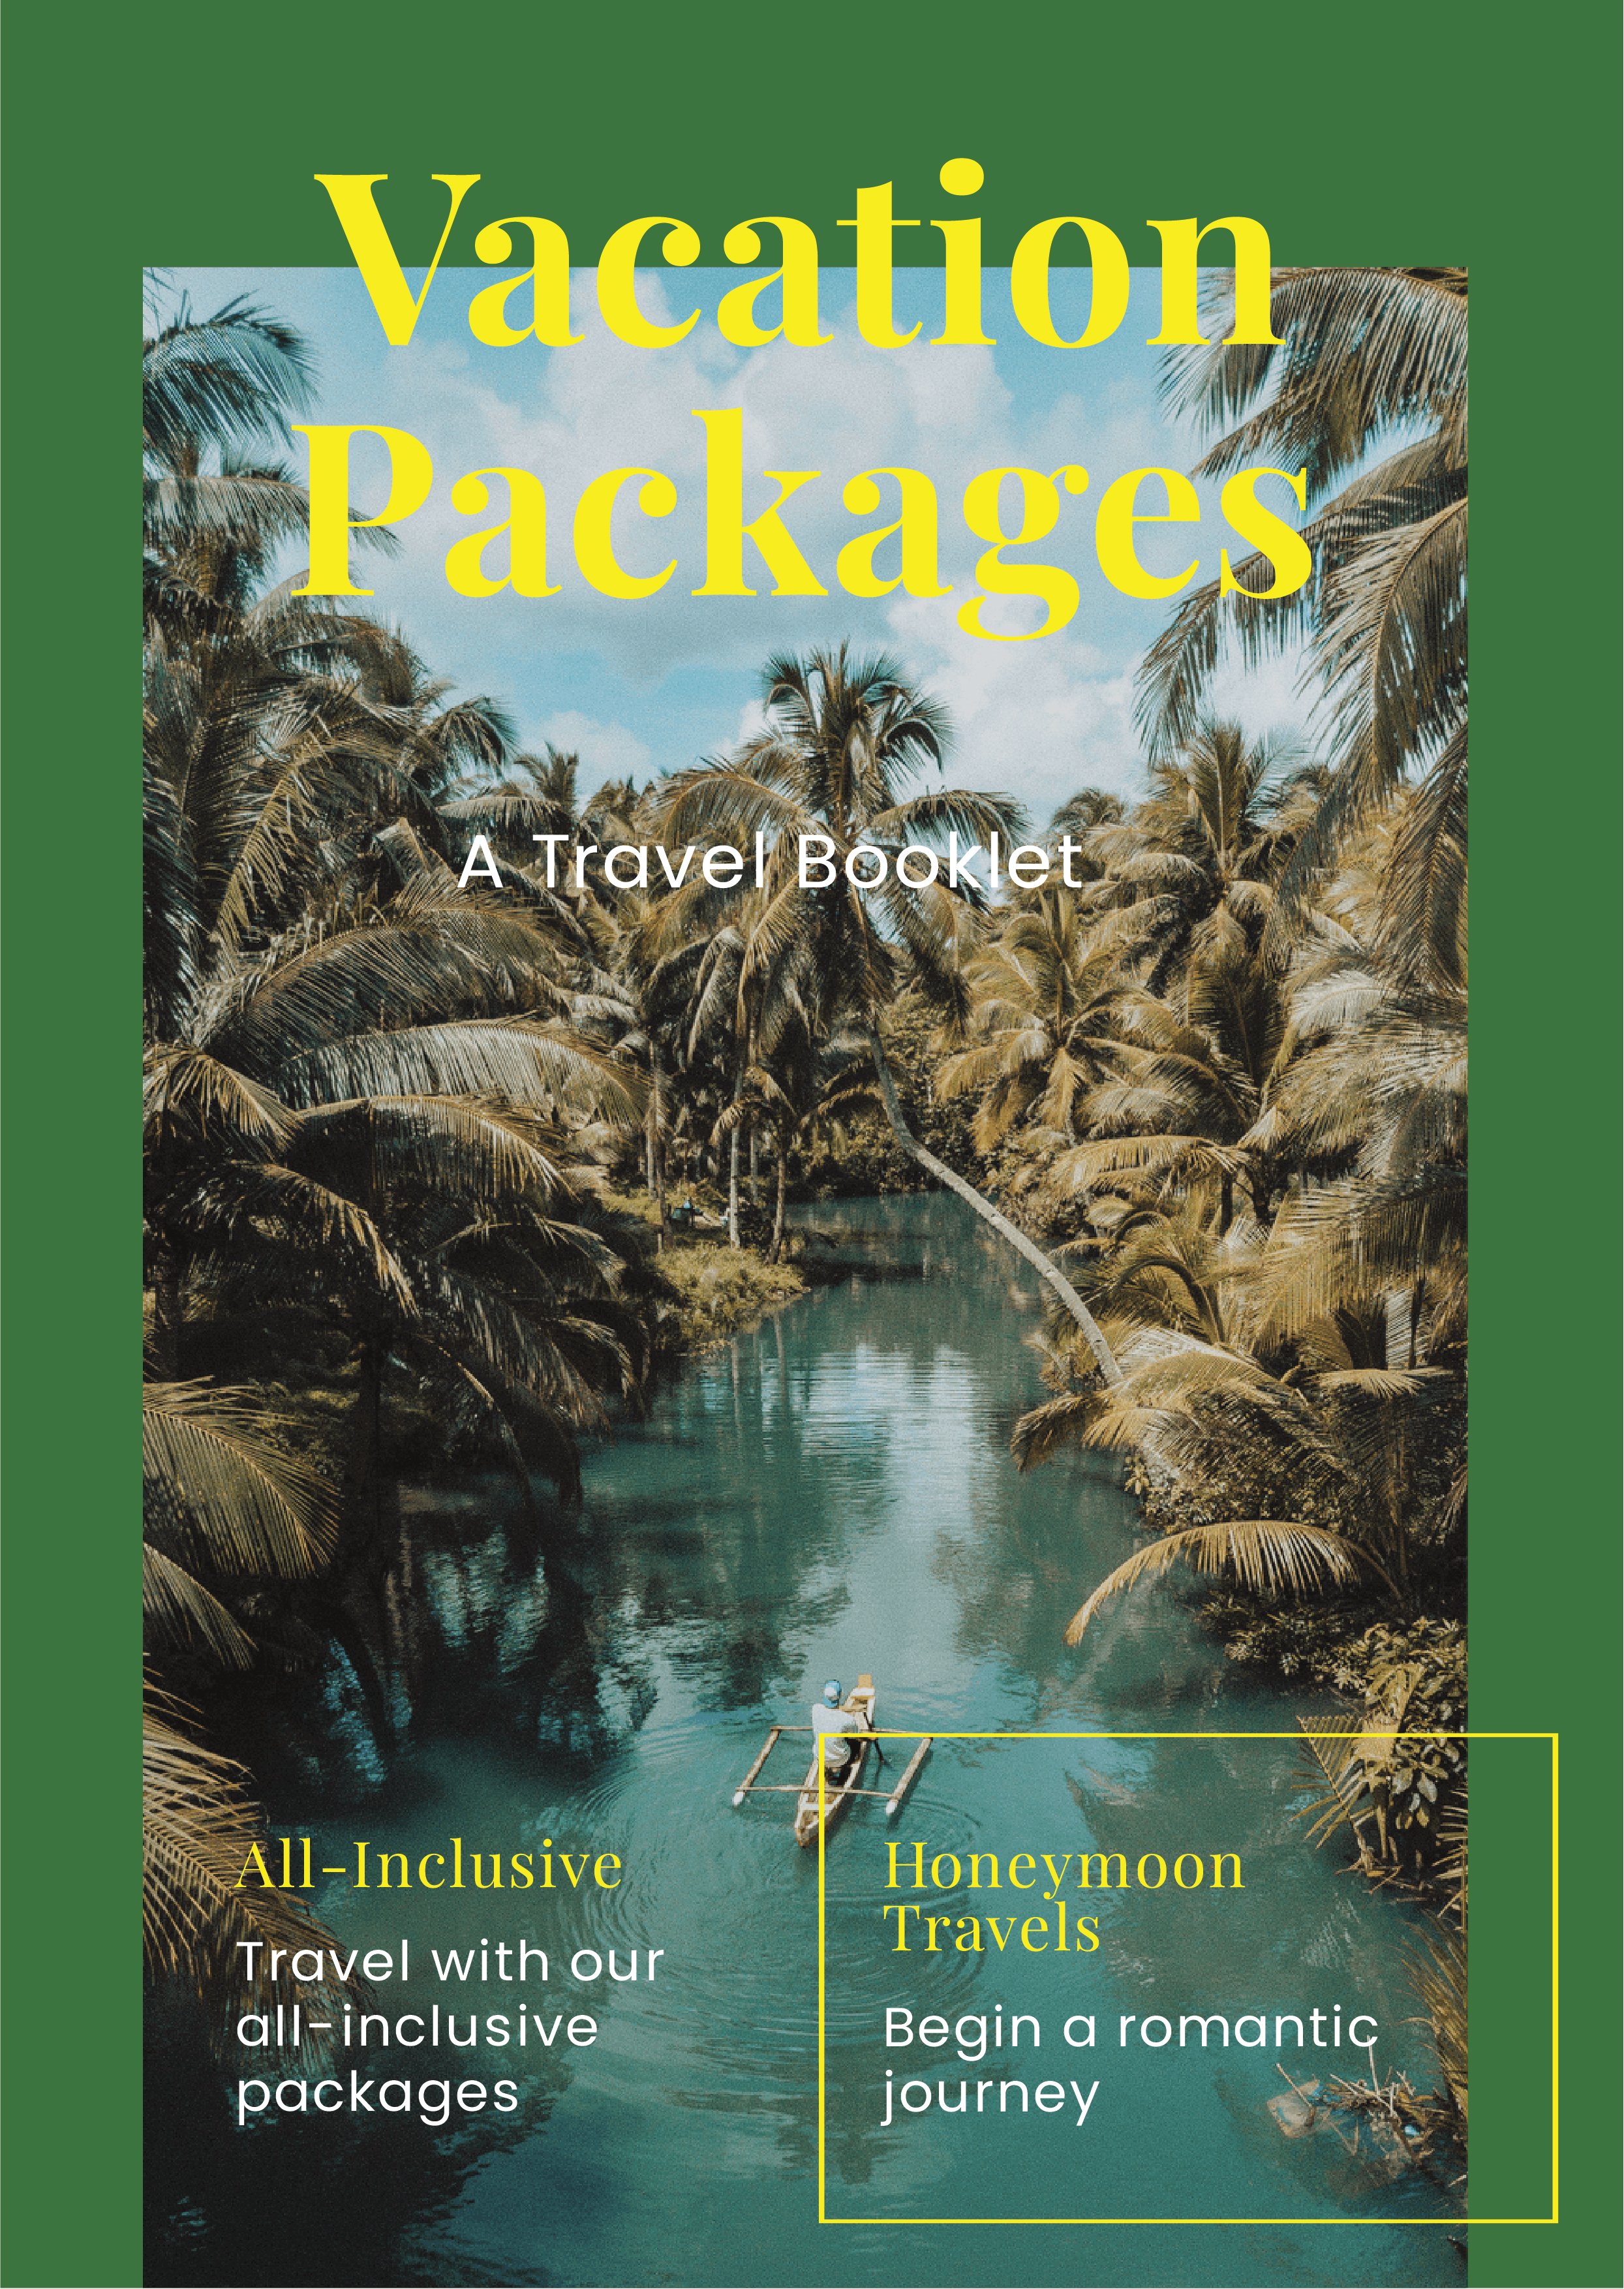 travel-booklet-template-download-in-word-google-docs-illustrator-psd-apple-pages